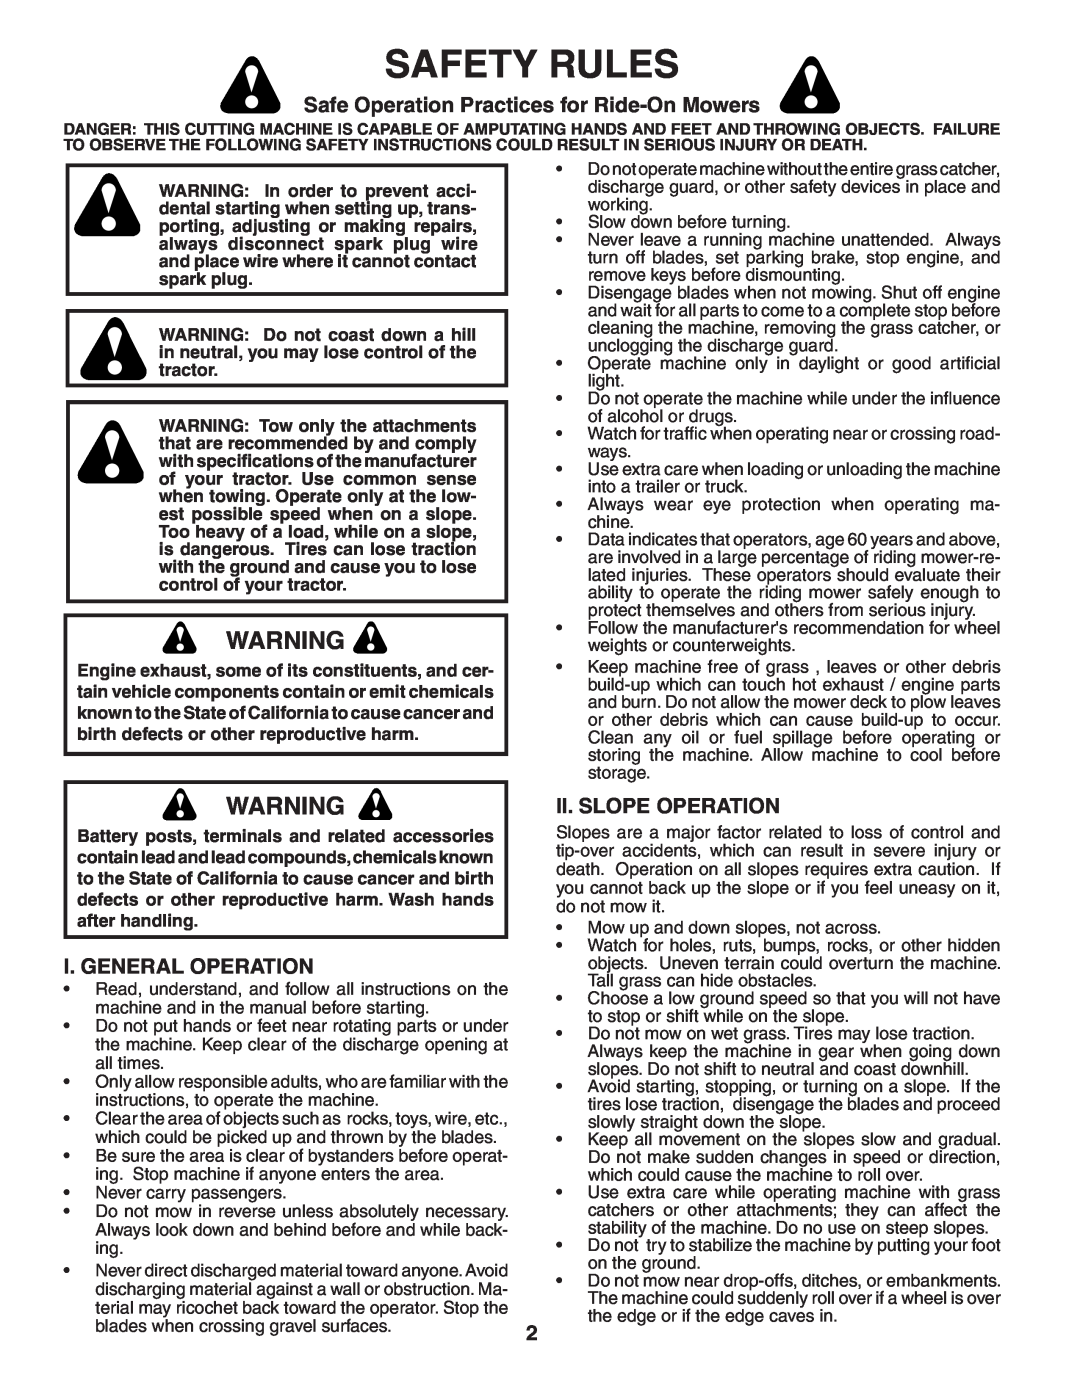 Poulan 96012004701 Safety Rules, Safe Operation Practices for Ride-On Mowers, I. General Operation, Ii. Slope Operation 